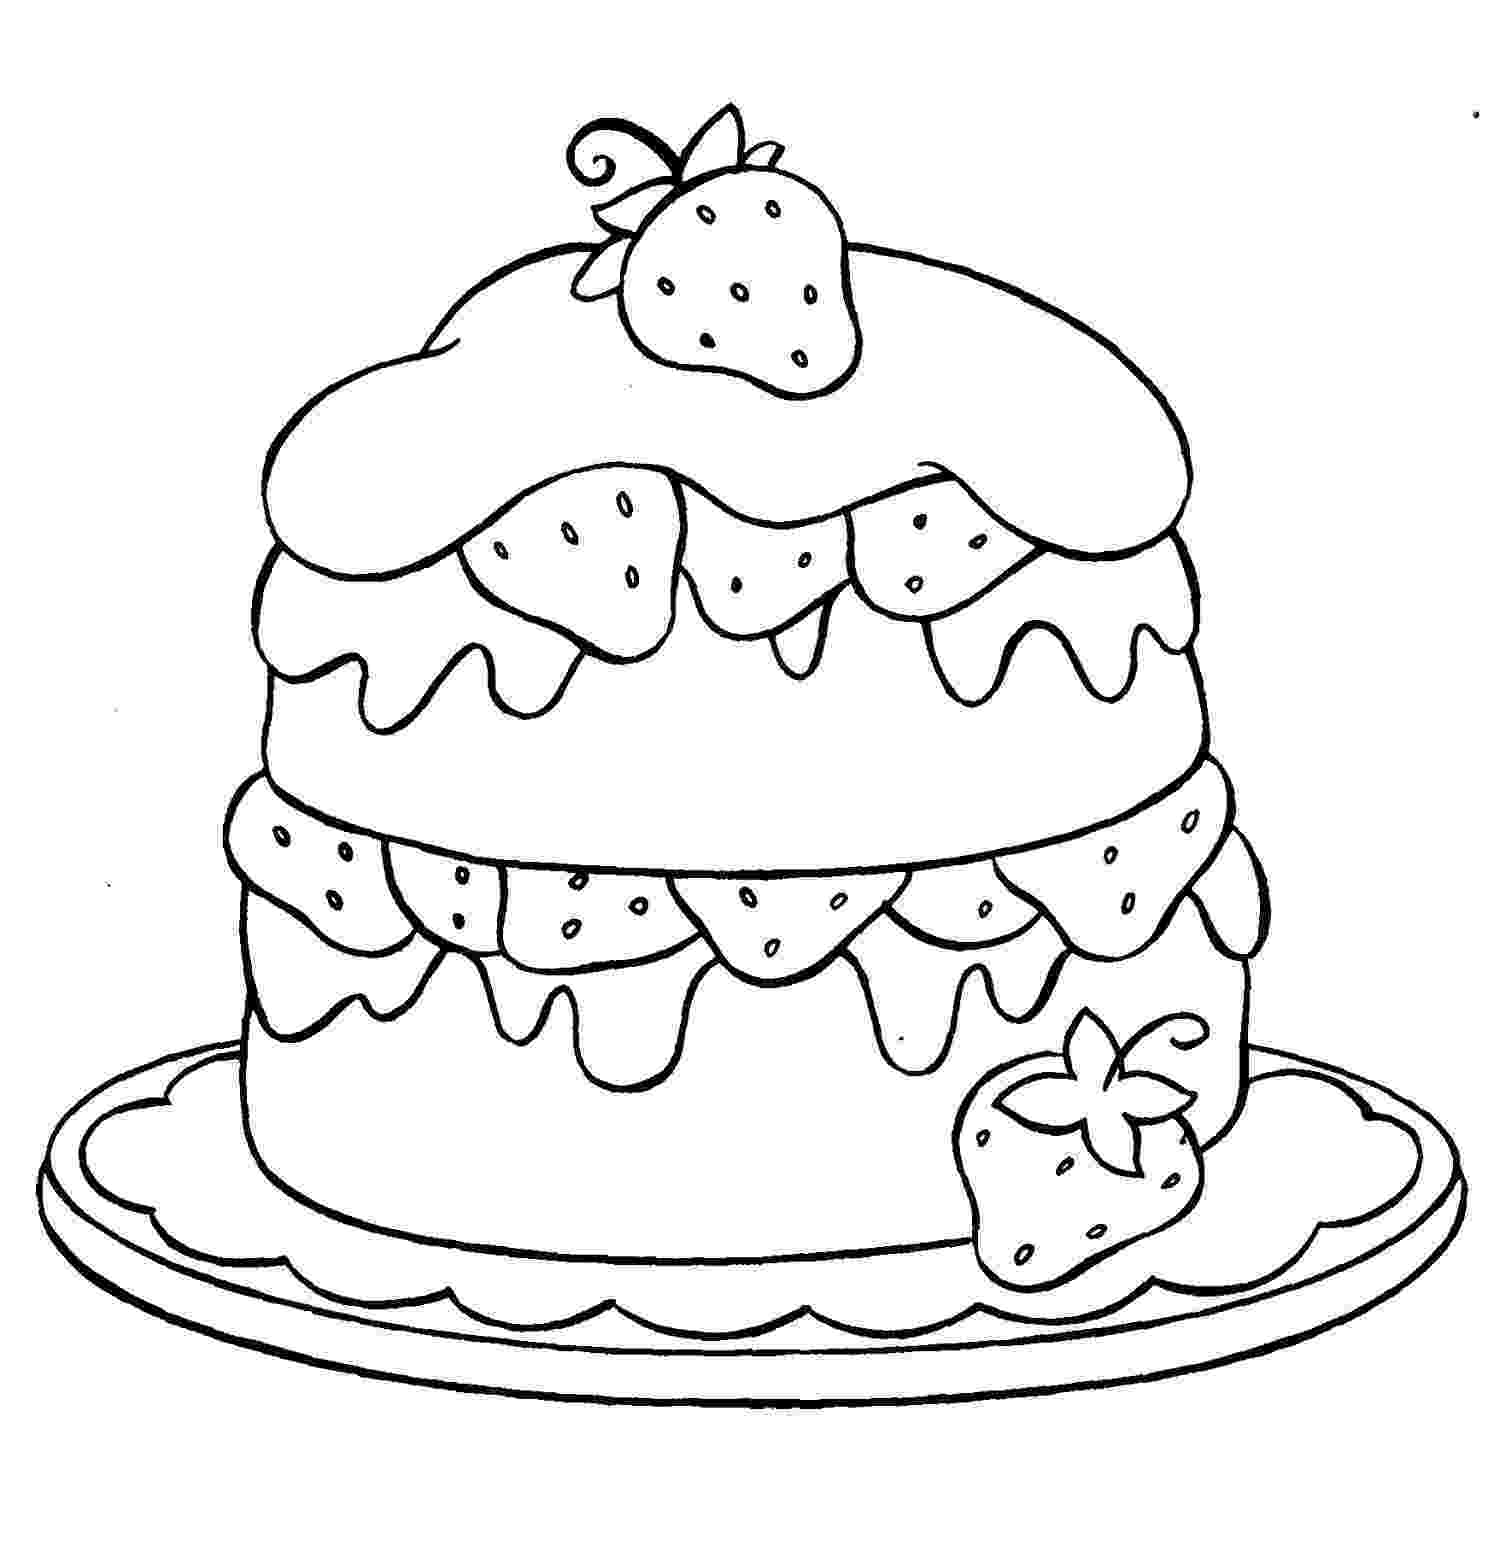 strawberry coloring pages strawberry coloring pages best coloring pages for kids strawberry coloring pages 